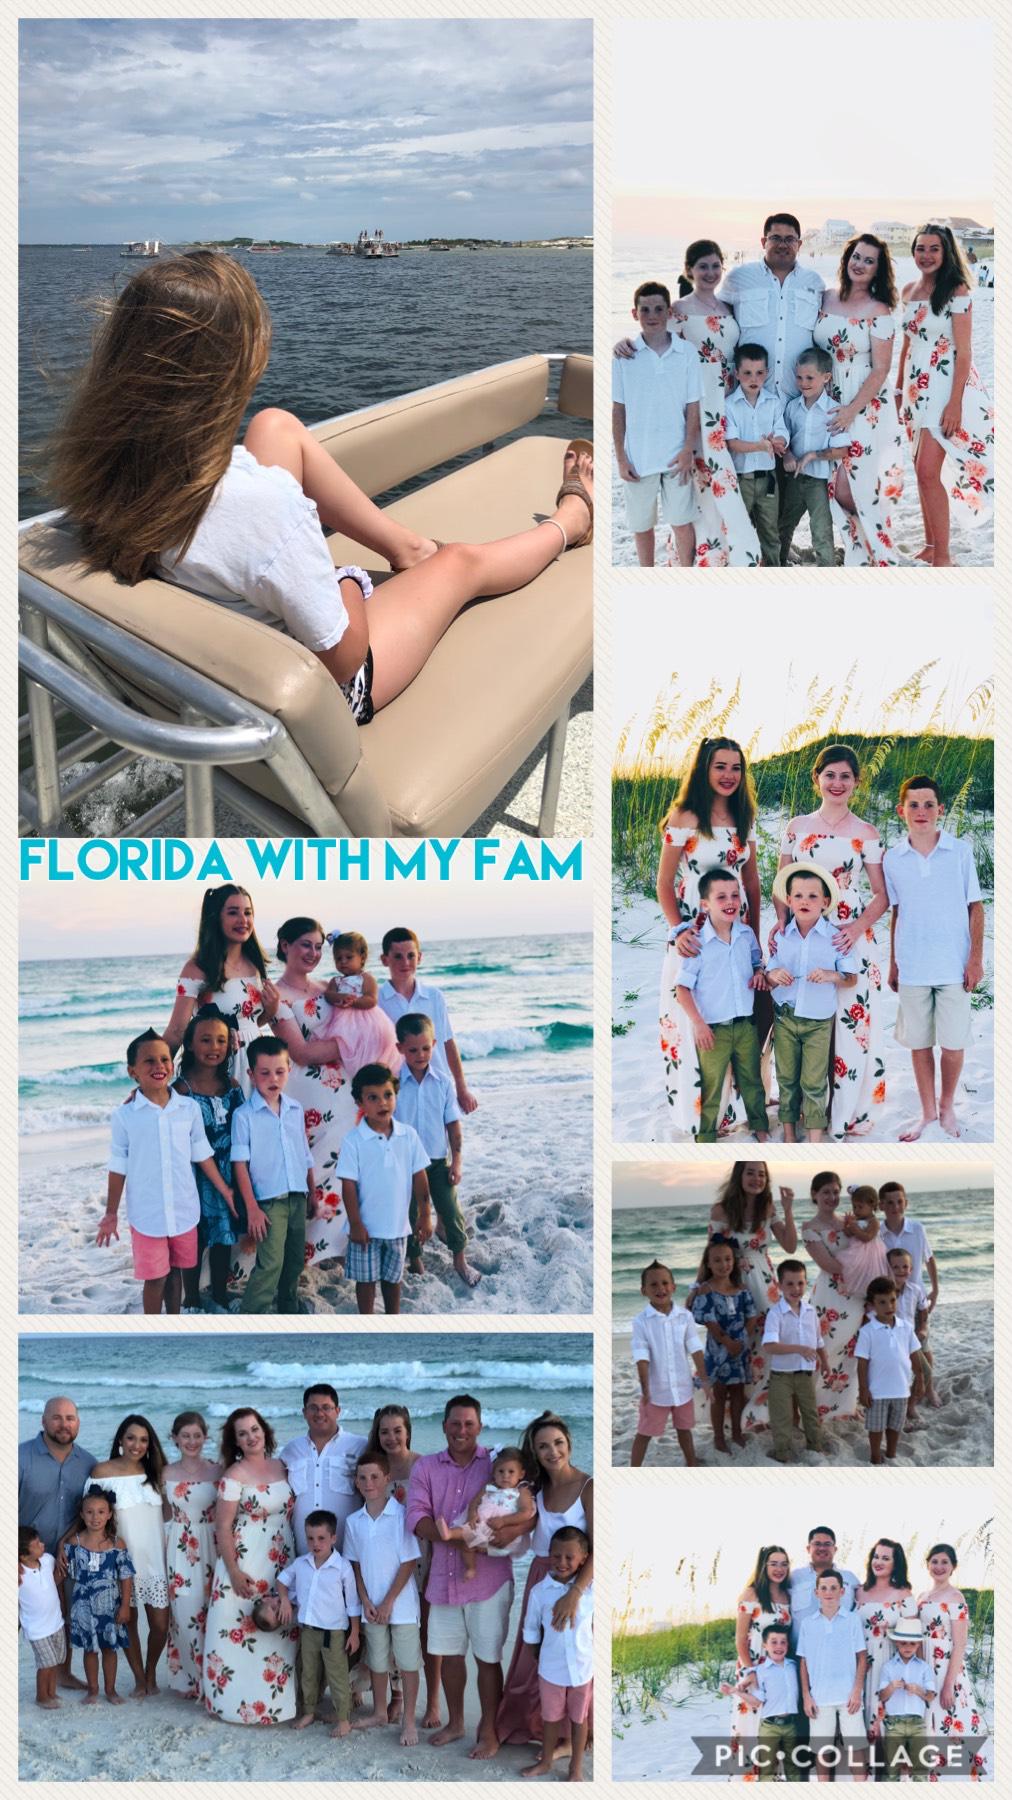 Florida with my fam